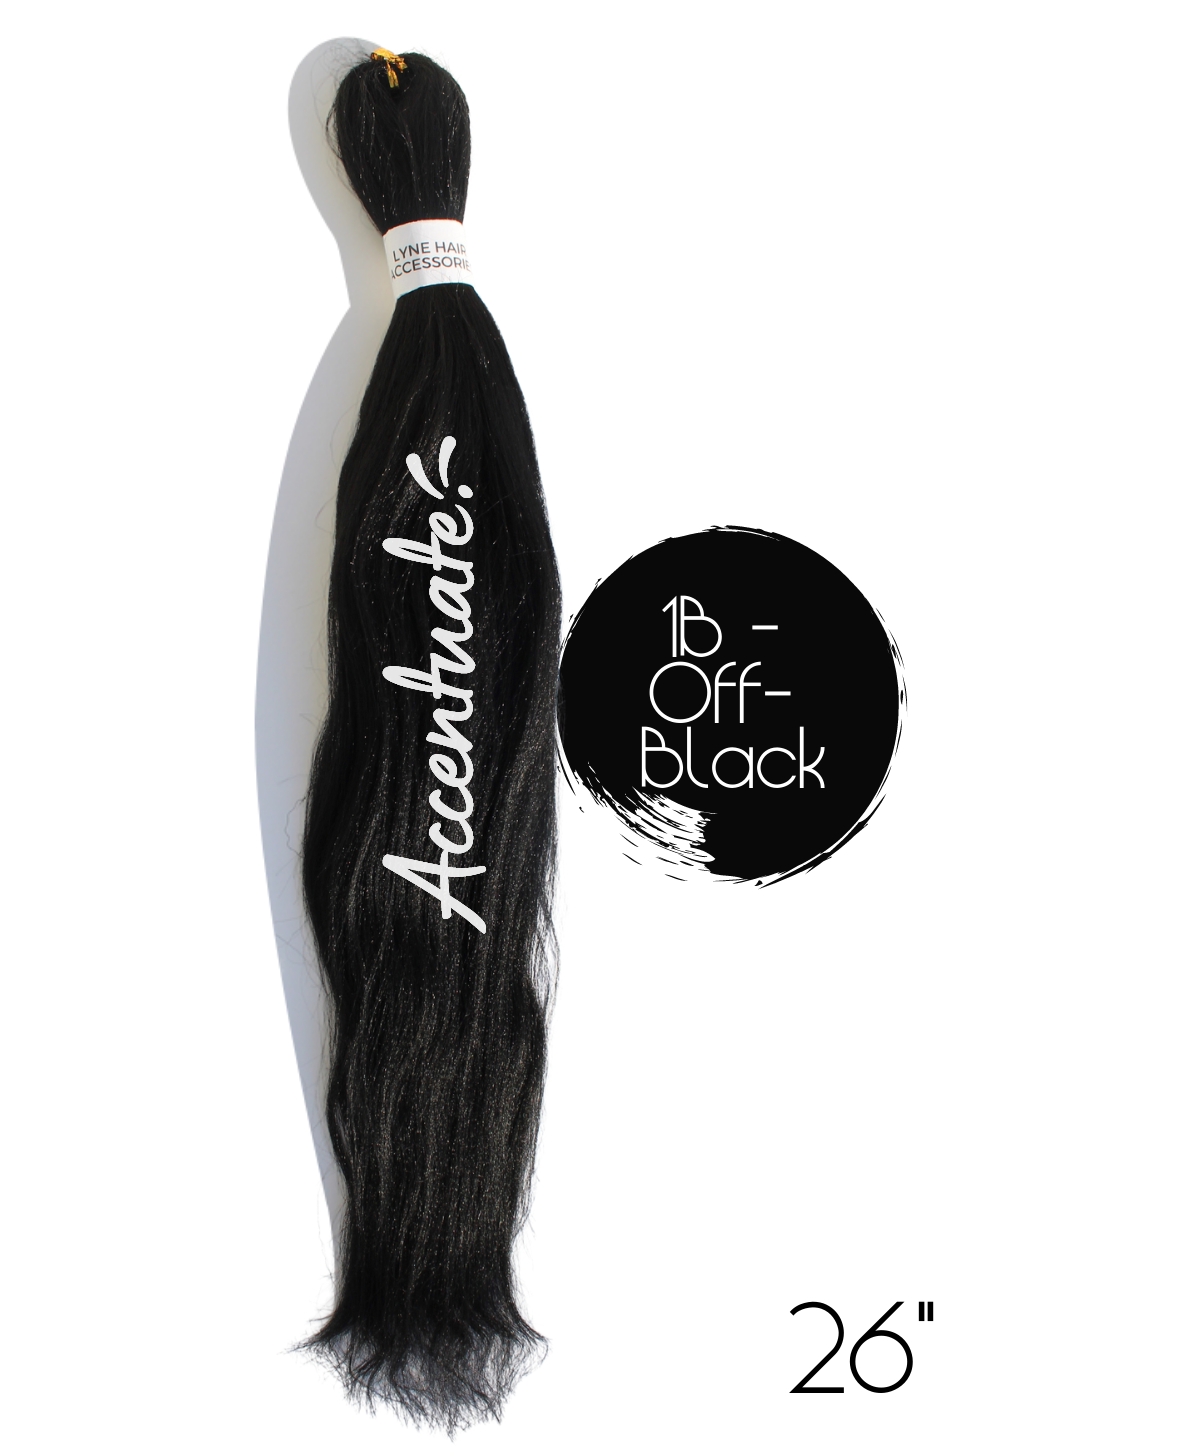 26" Plain 1B - Off Black Pre-Stretched Hair Extension